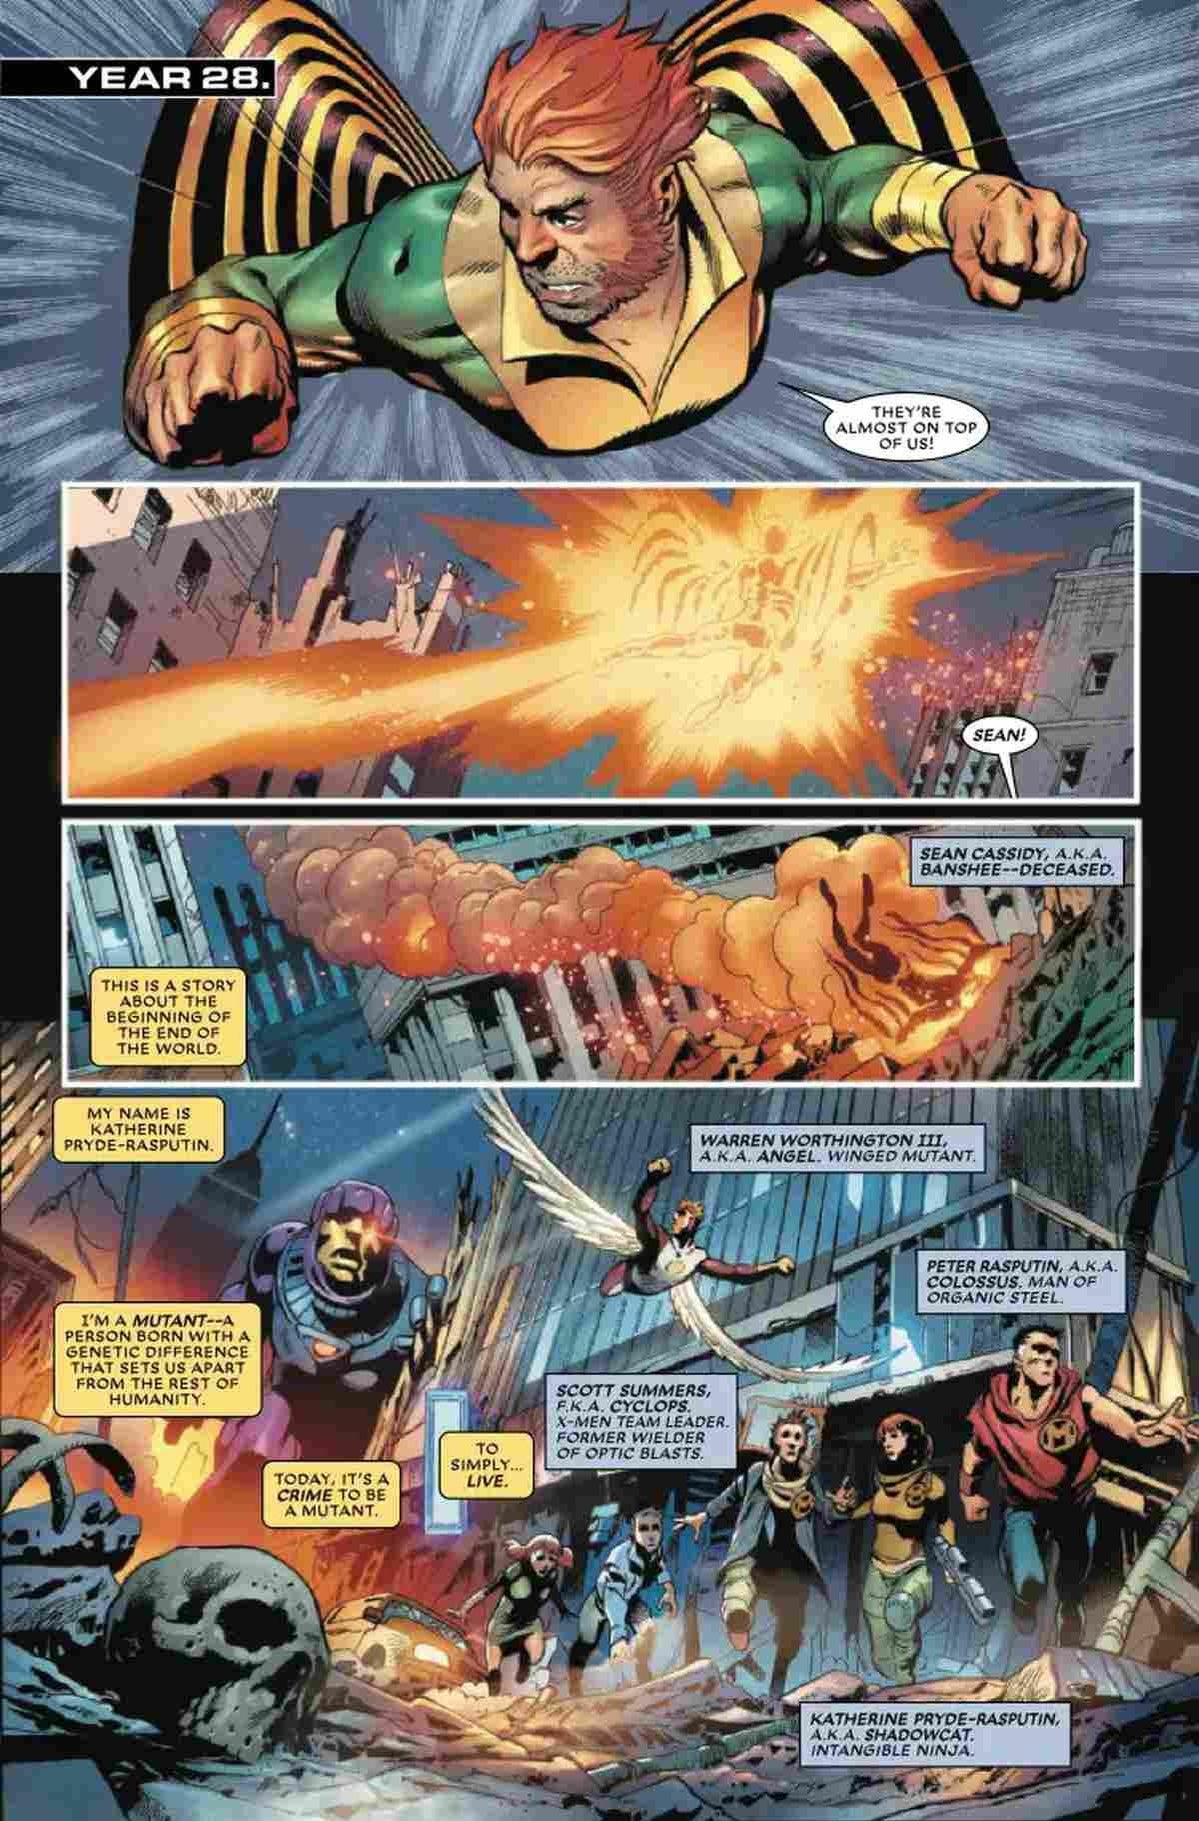 x-men-days-of-future-past-doomsday-1-preview-page-1.jpg